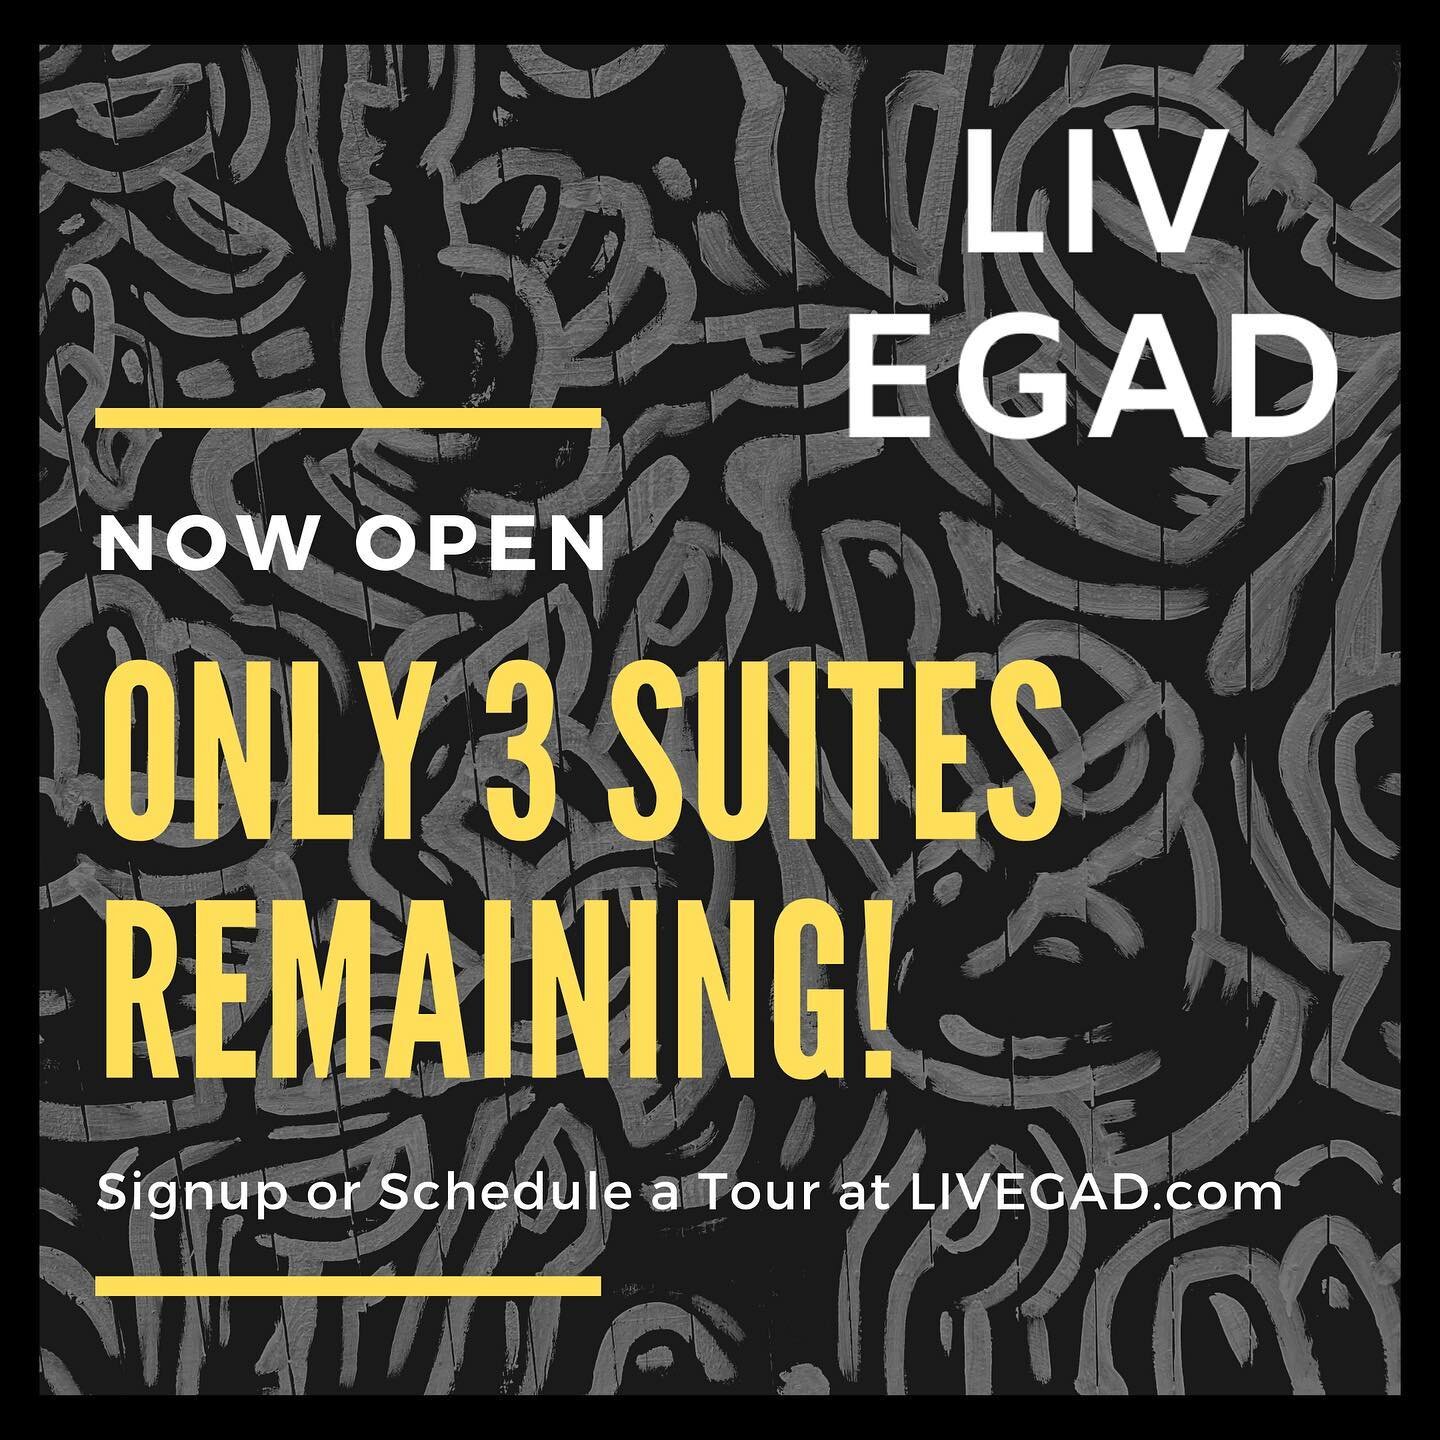 3 ground floor suites remaining! Visit us at LIVEGAD.com to signup or schedule a tour! #privateoffice #coworkingspace #EGAD